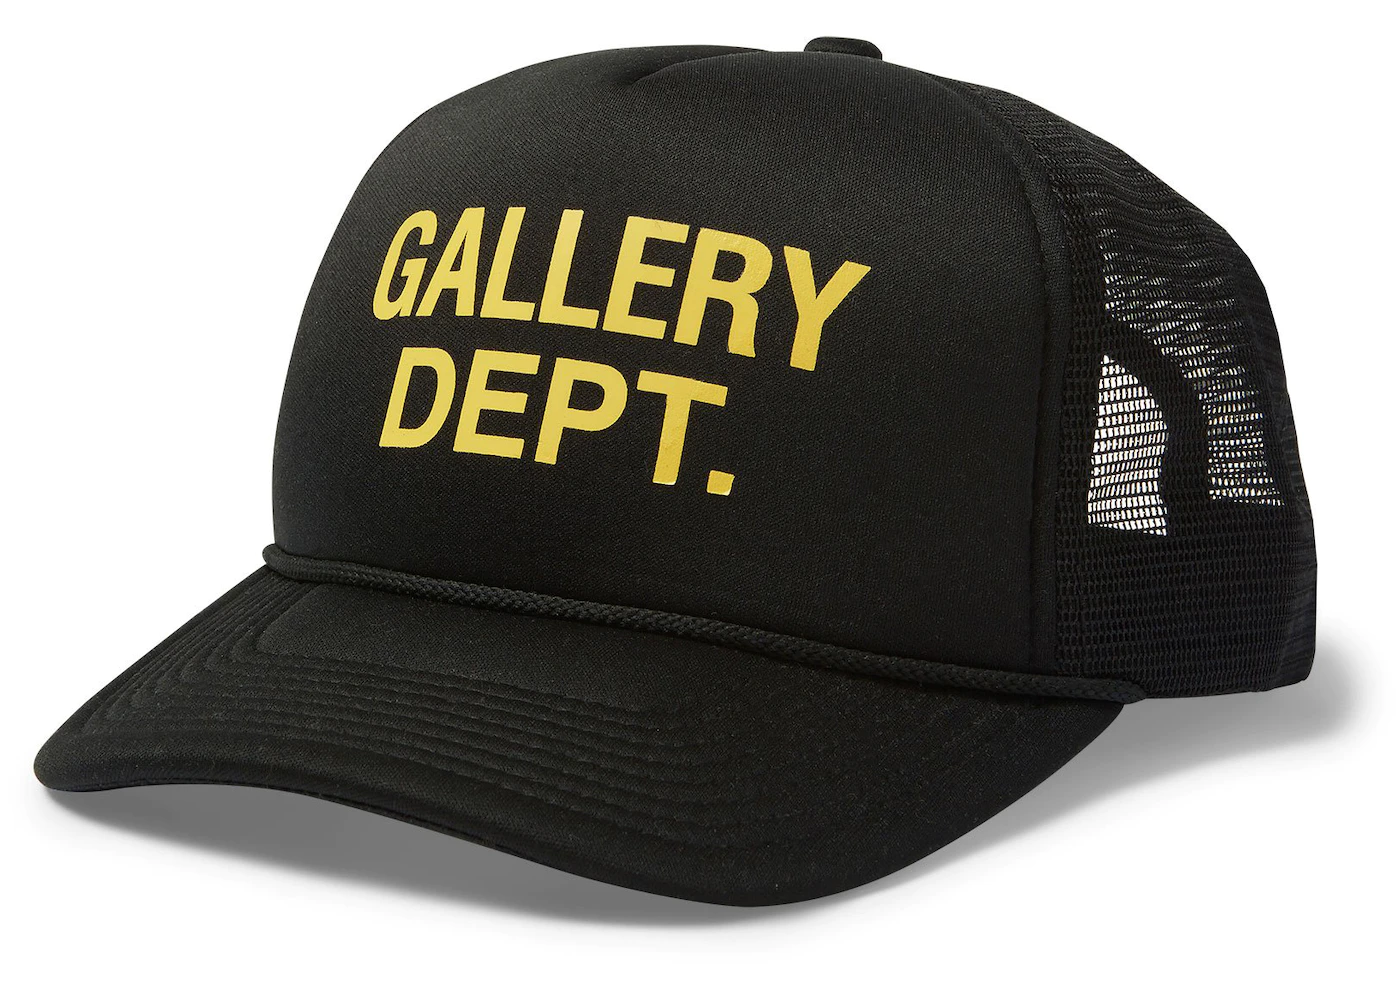 What is Gallery Dept Hat